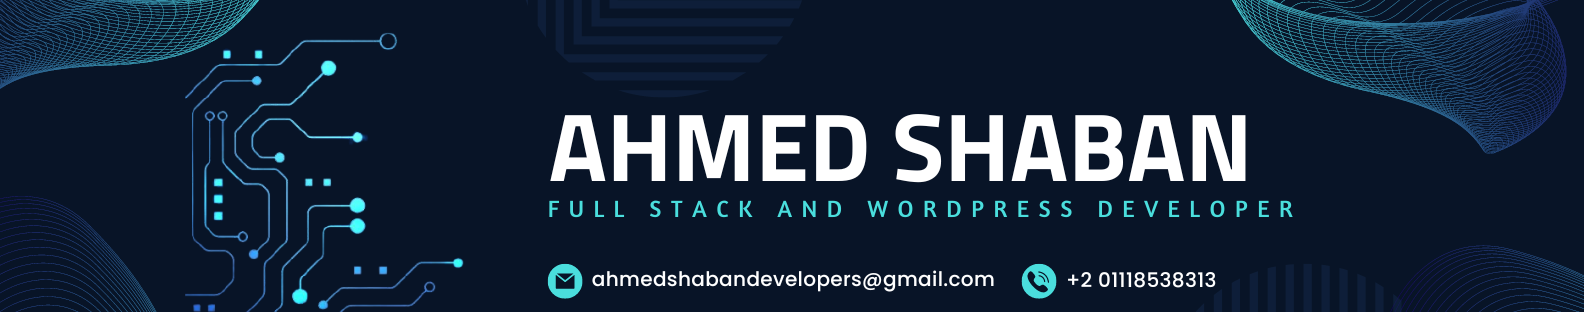 Ahmed Shaban's profile banner